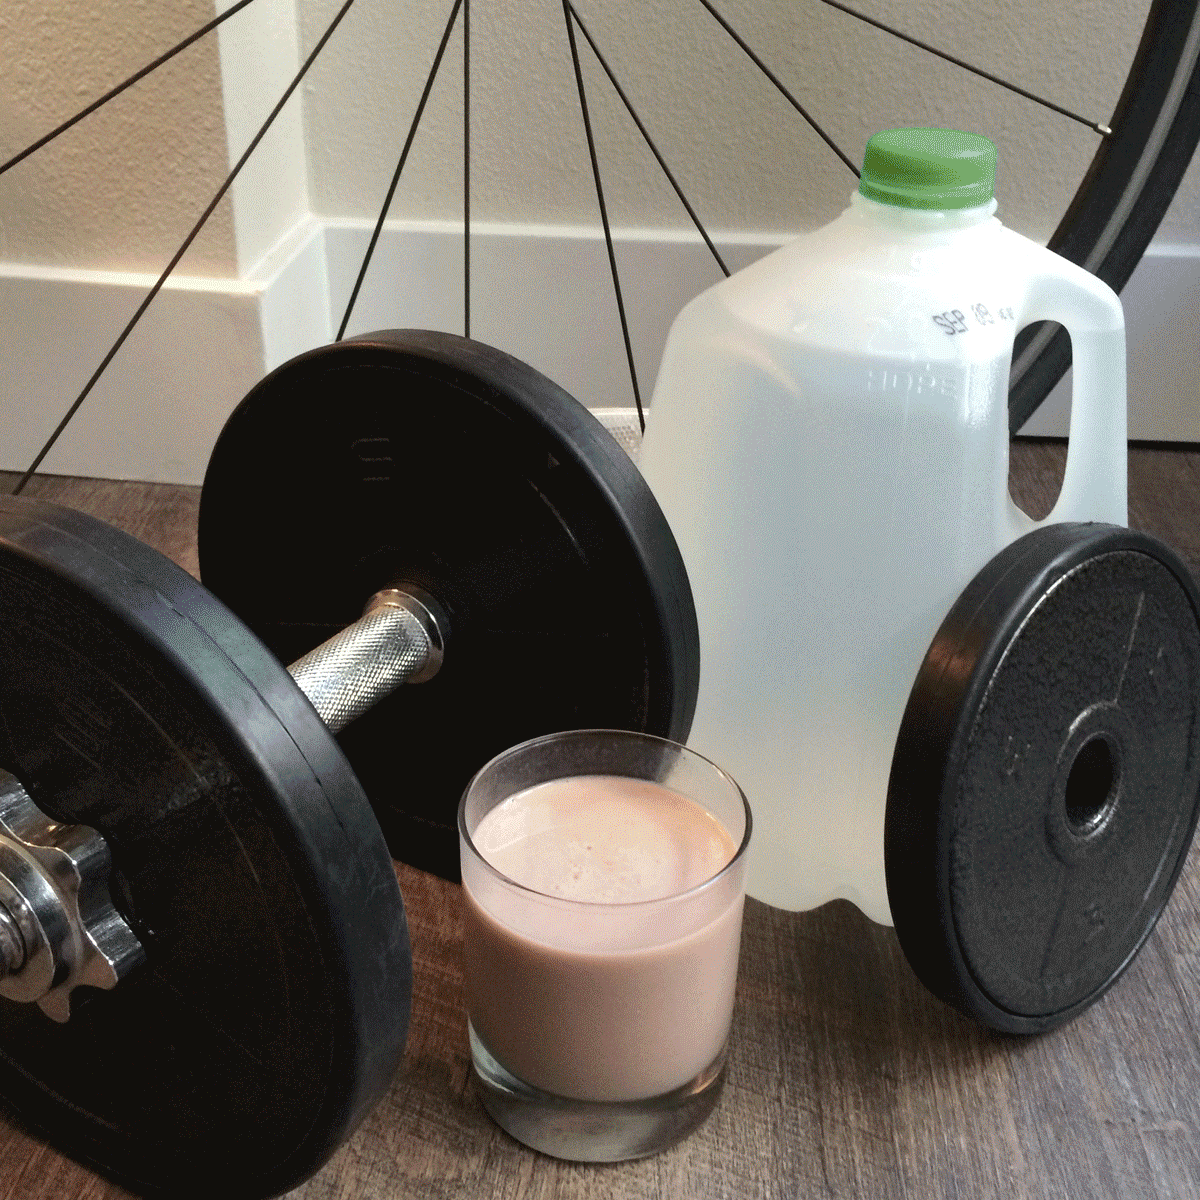 workout equipment - dumbbell, milk jug and chocolate milk for recovery